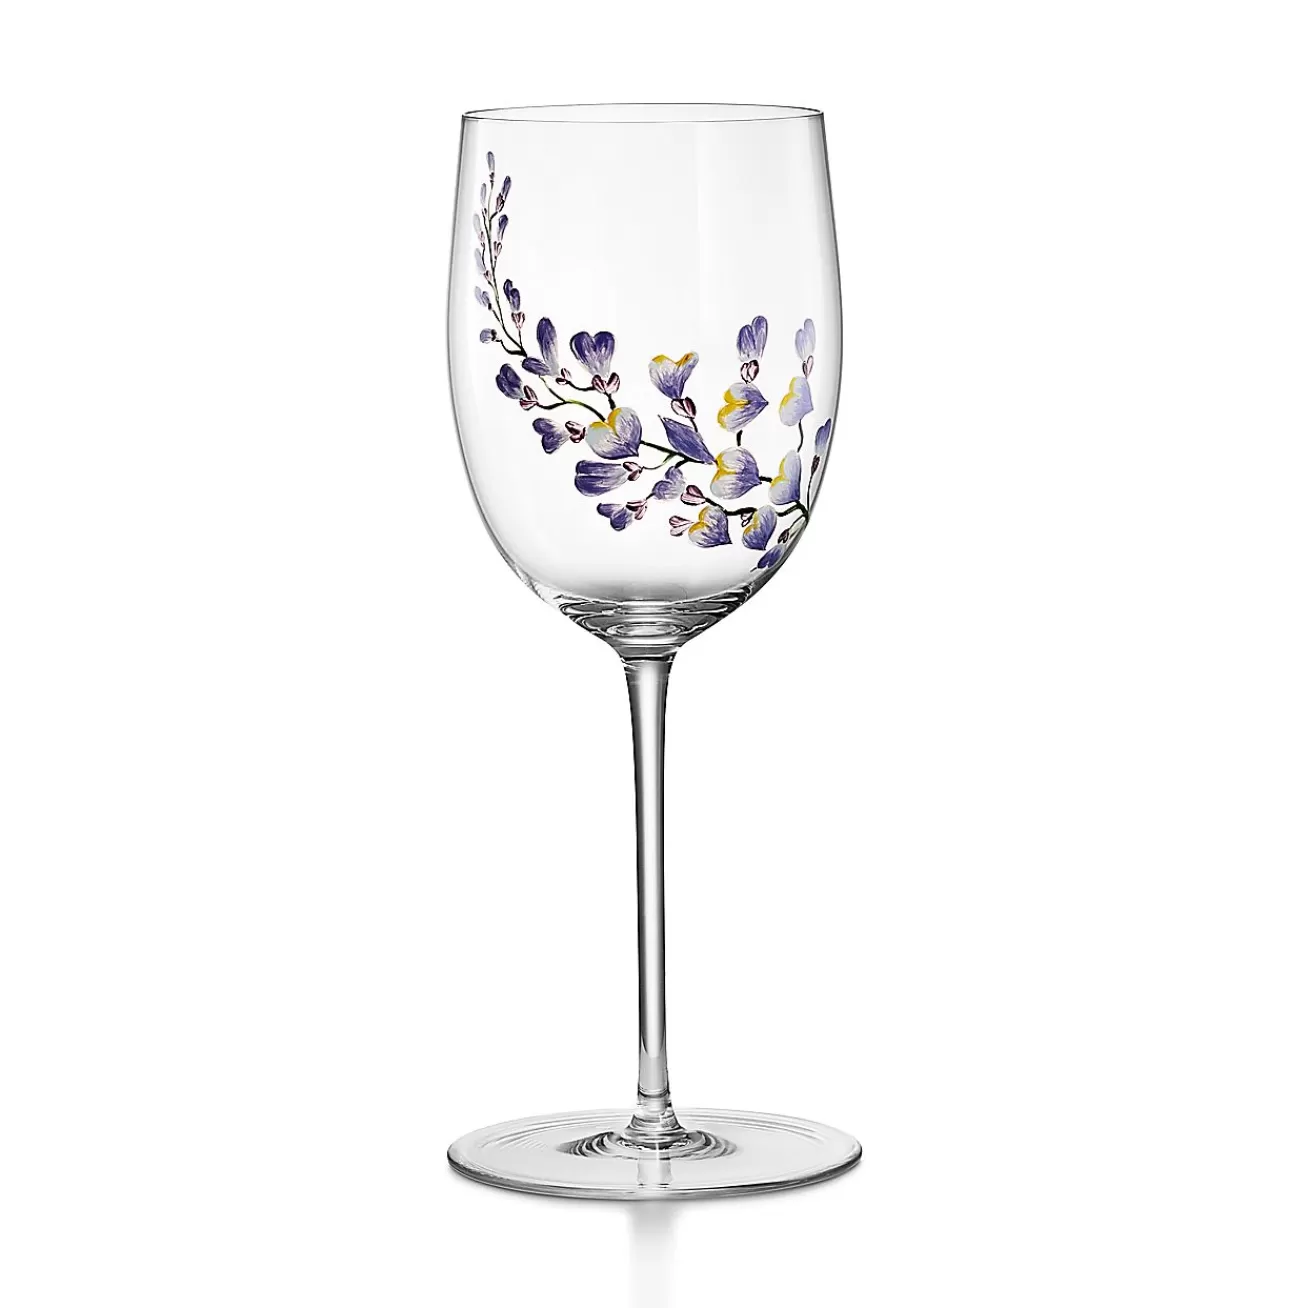 Tiffany & Co. Tiffany Wisteria White Wine Glass in Glass | ^ The Couple | Wedding Gifts